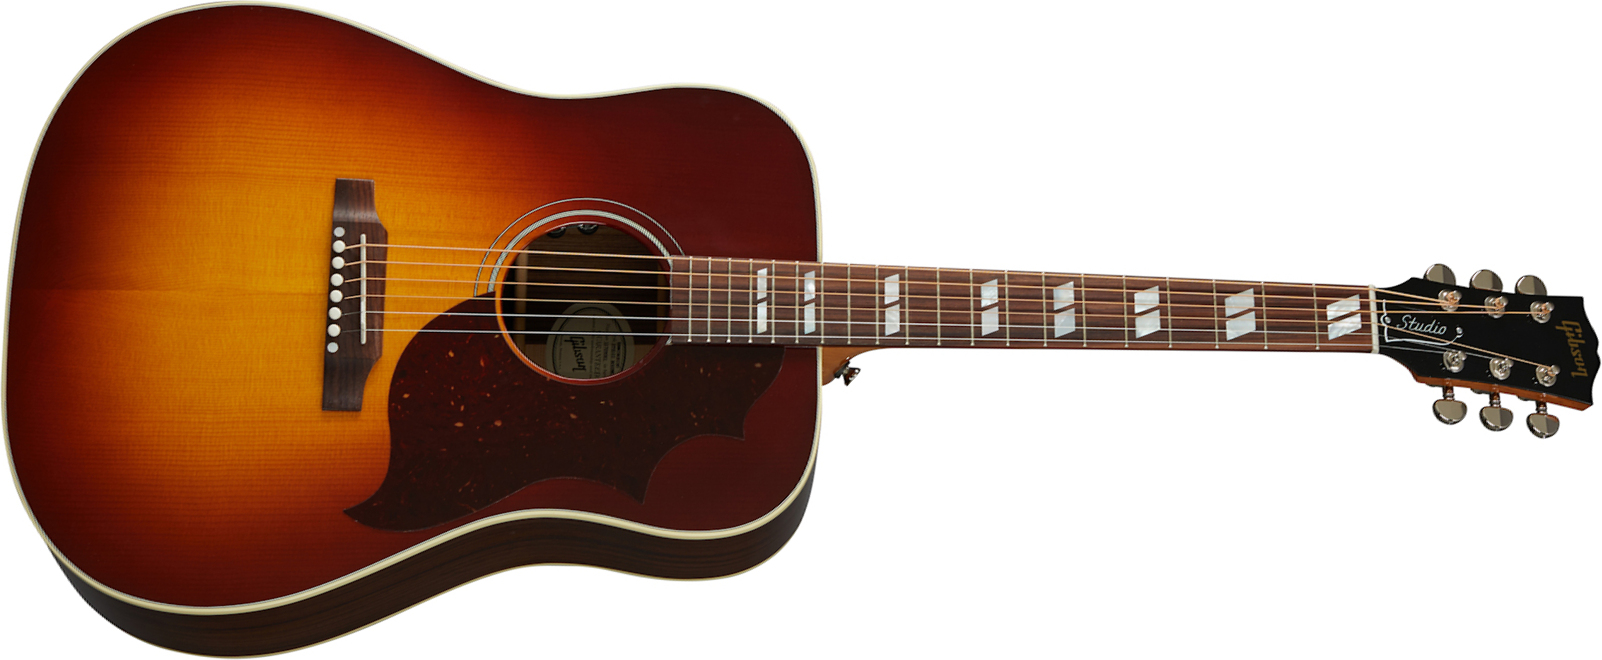 Gibson Hummingbird Studio Rosewood Modern 2020 Dreadnought Epicea Palissandre Rw - Rosewood Burst - Electro acoustic guitar - Main picture